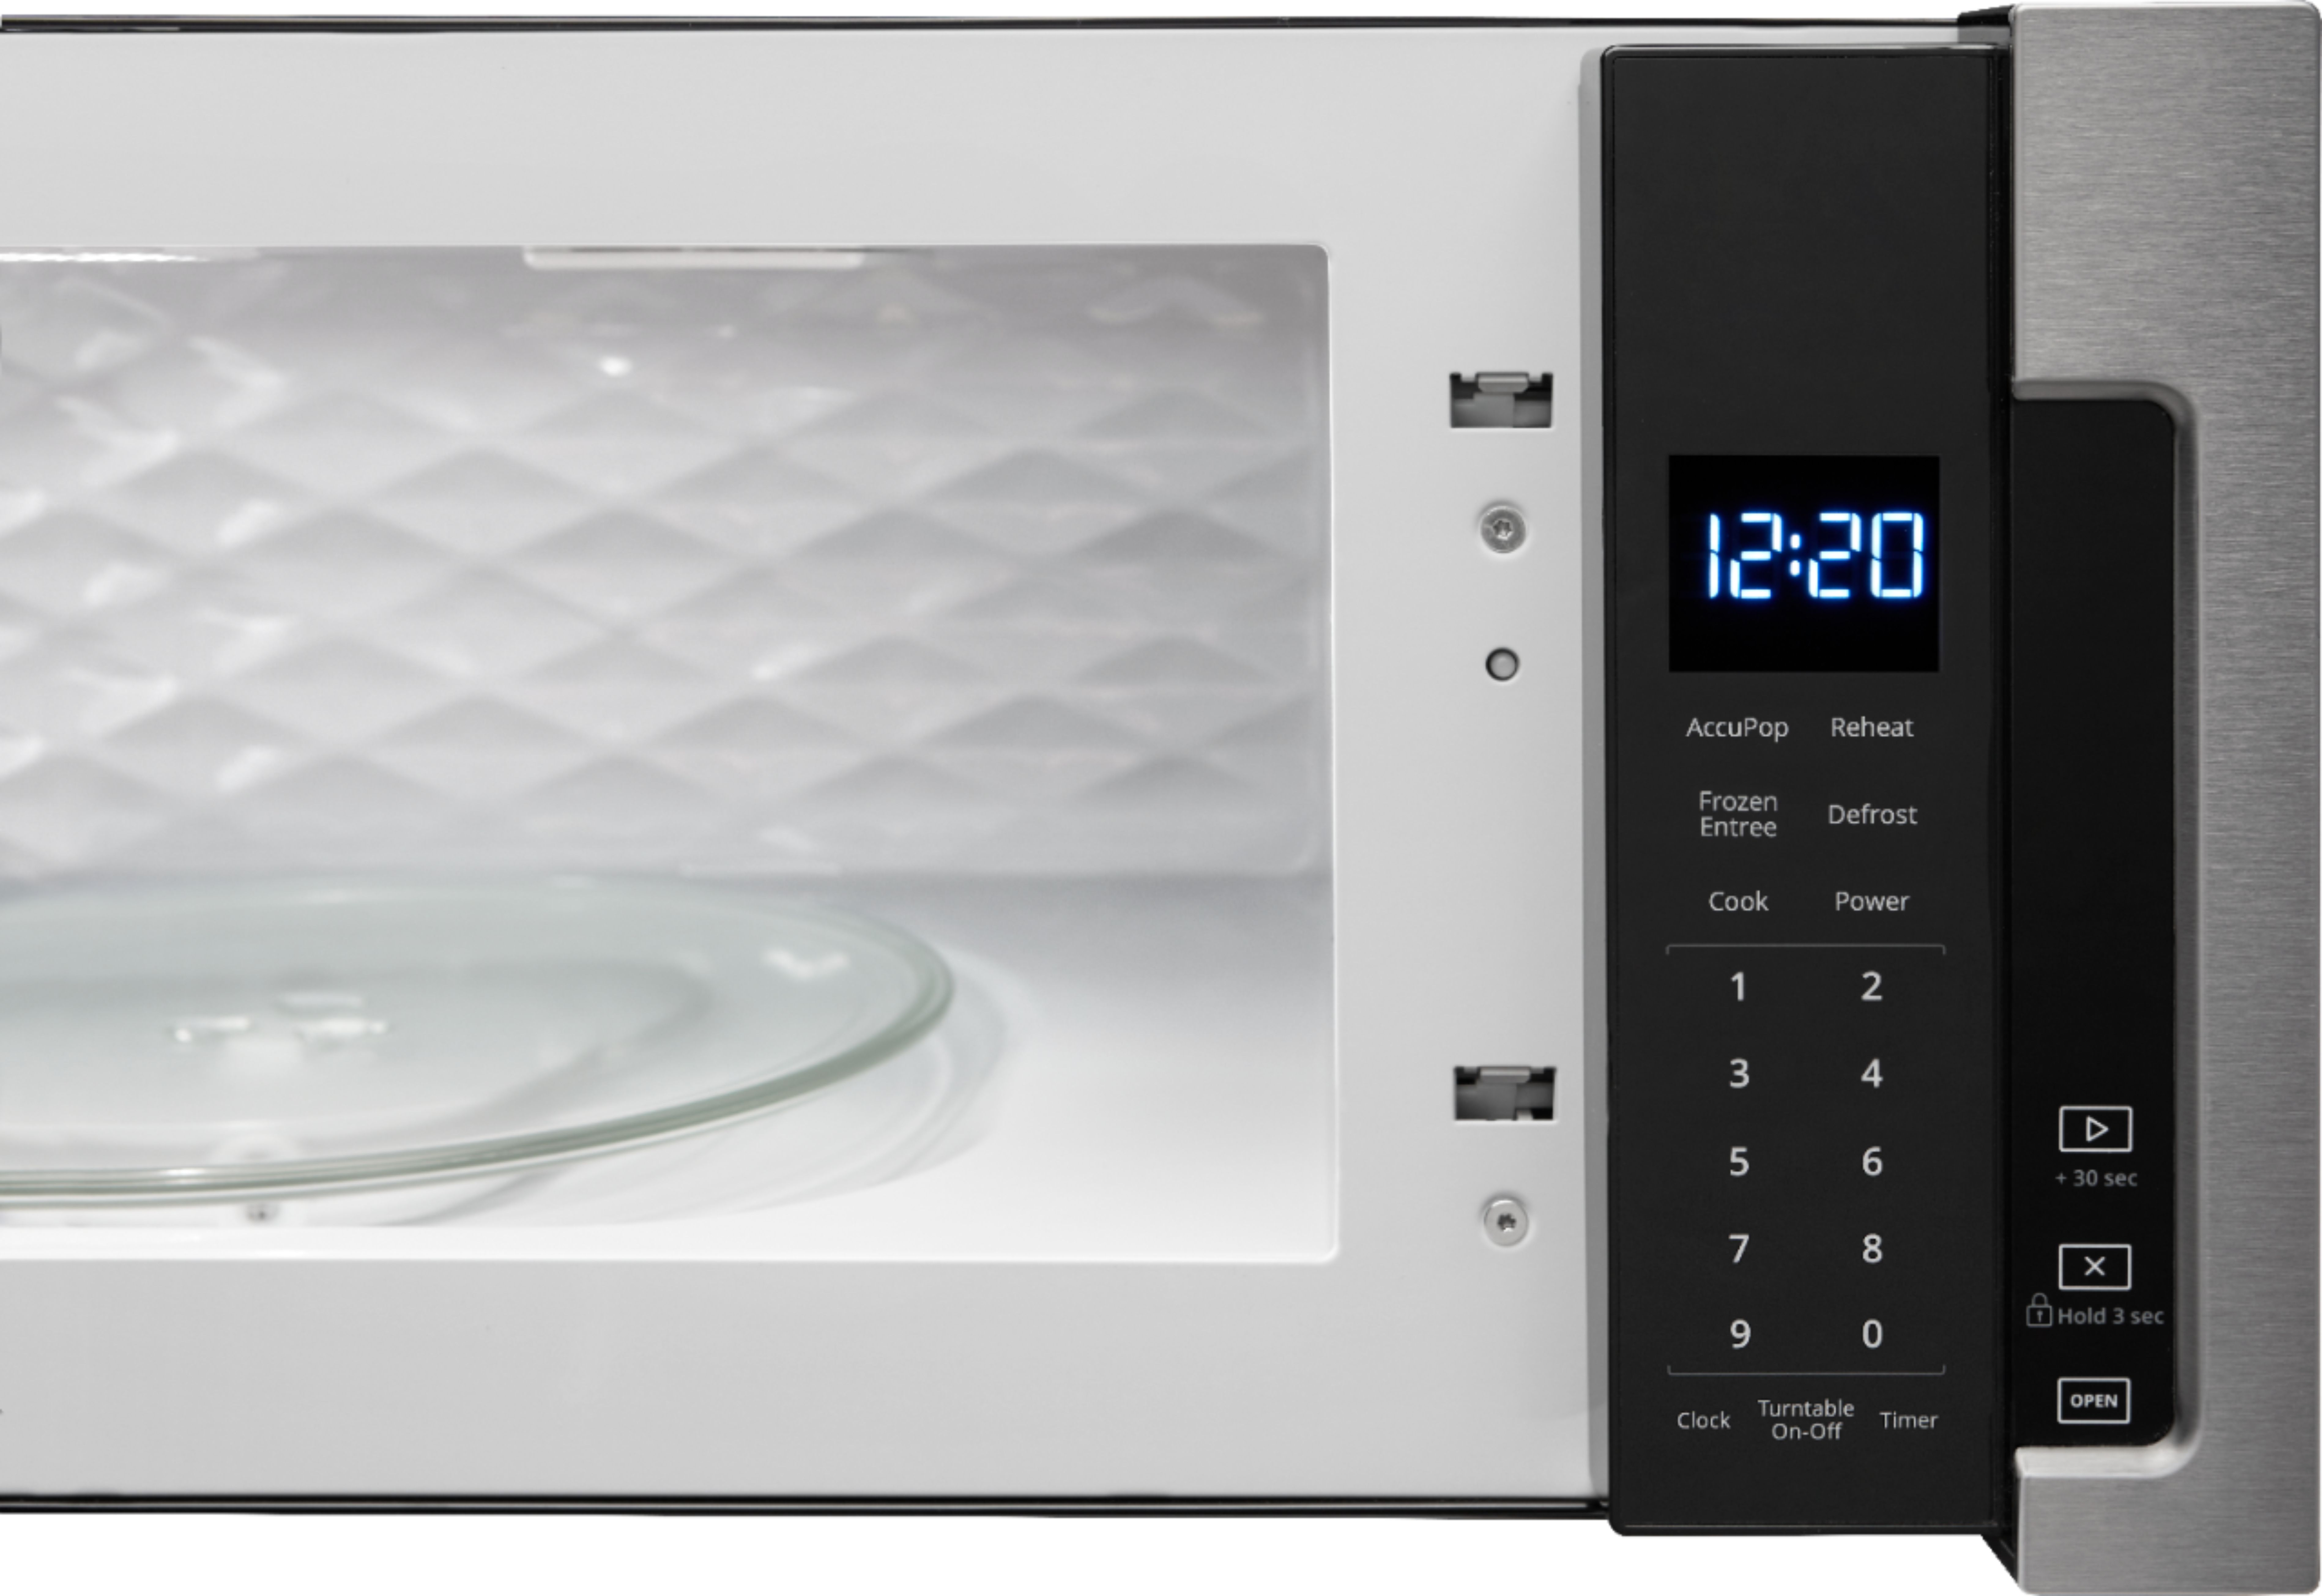 Microwaves – Built-In, Over-the-Range & More